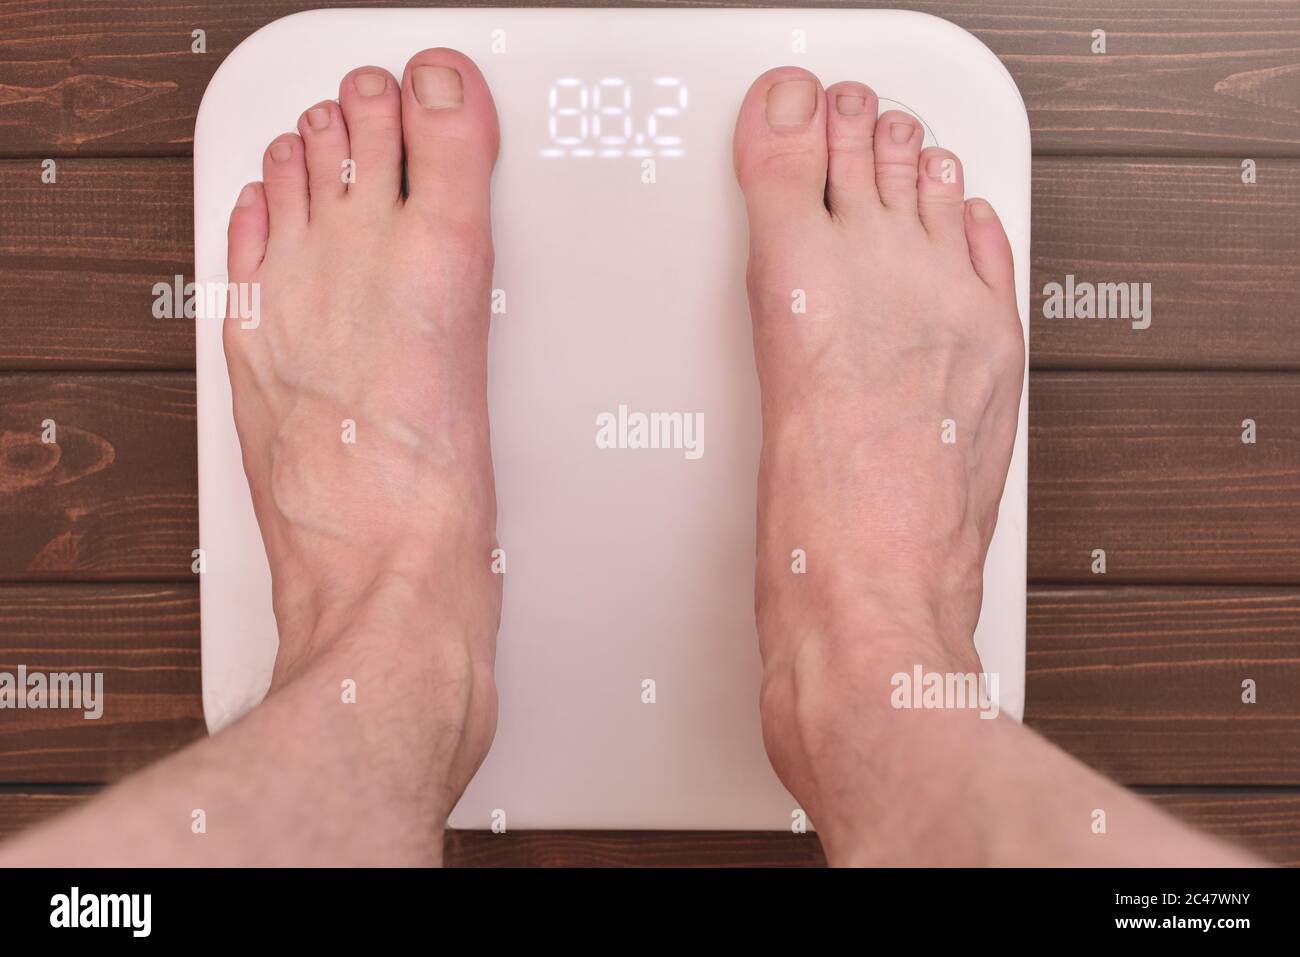 men's feet on an modern electronic scales. sports concept Stock Photo